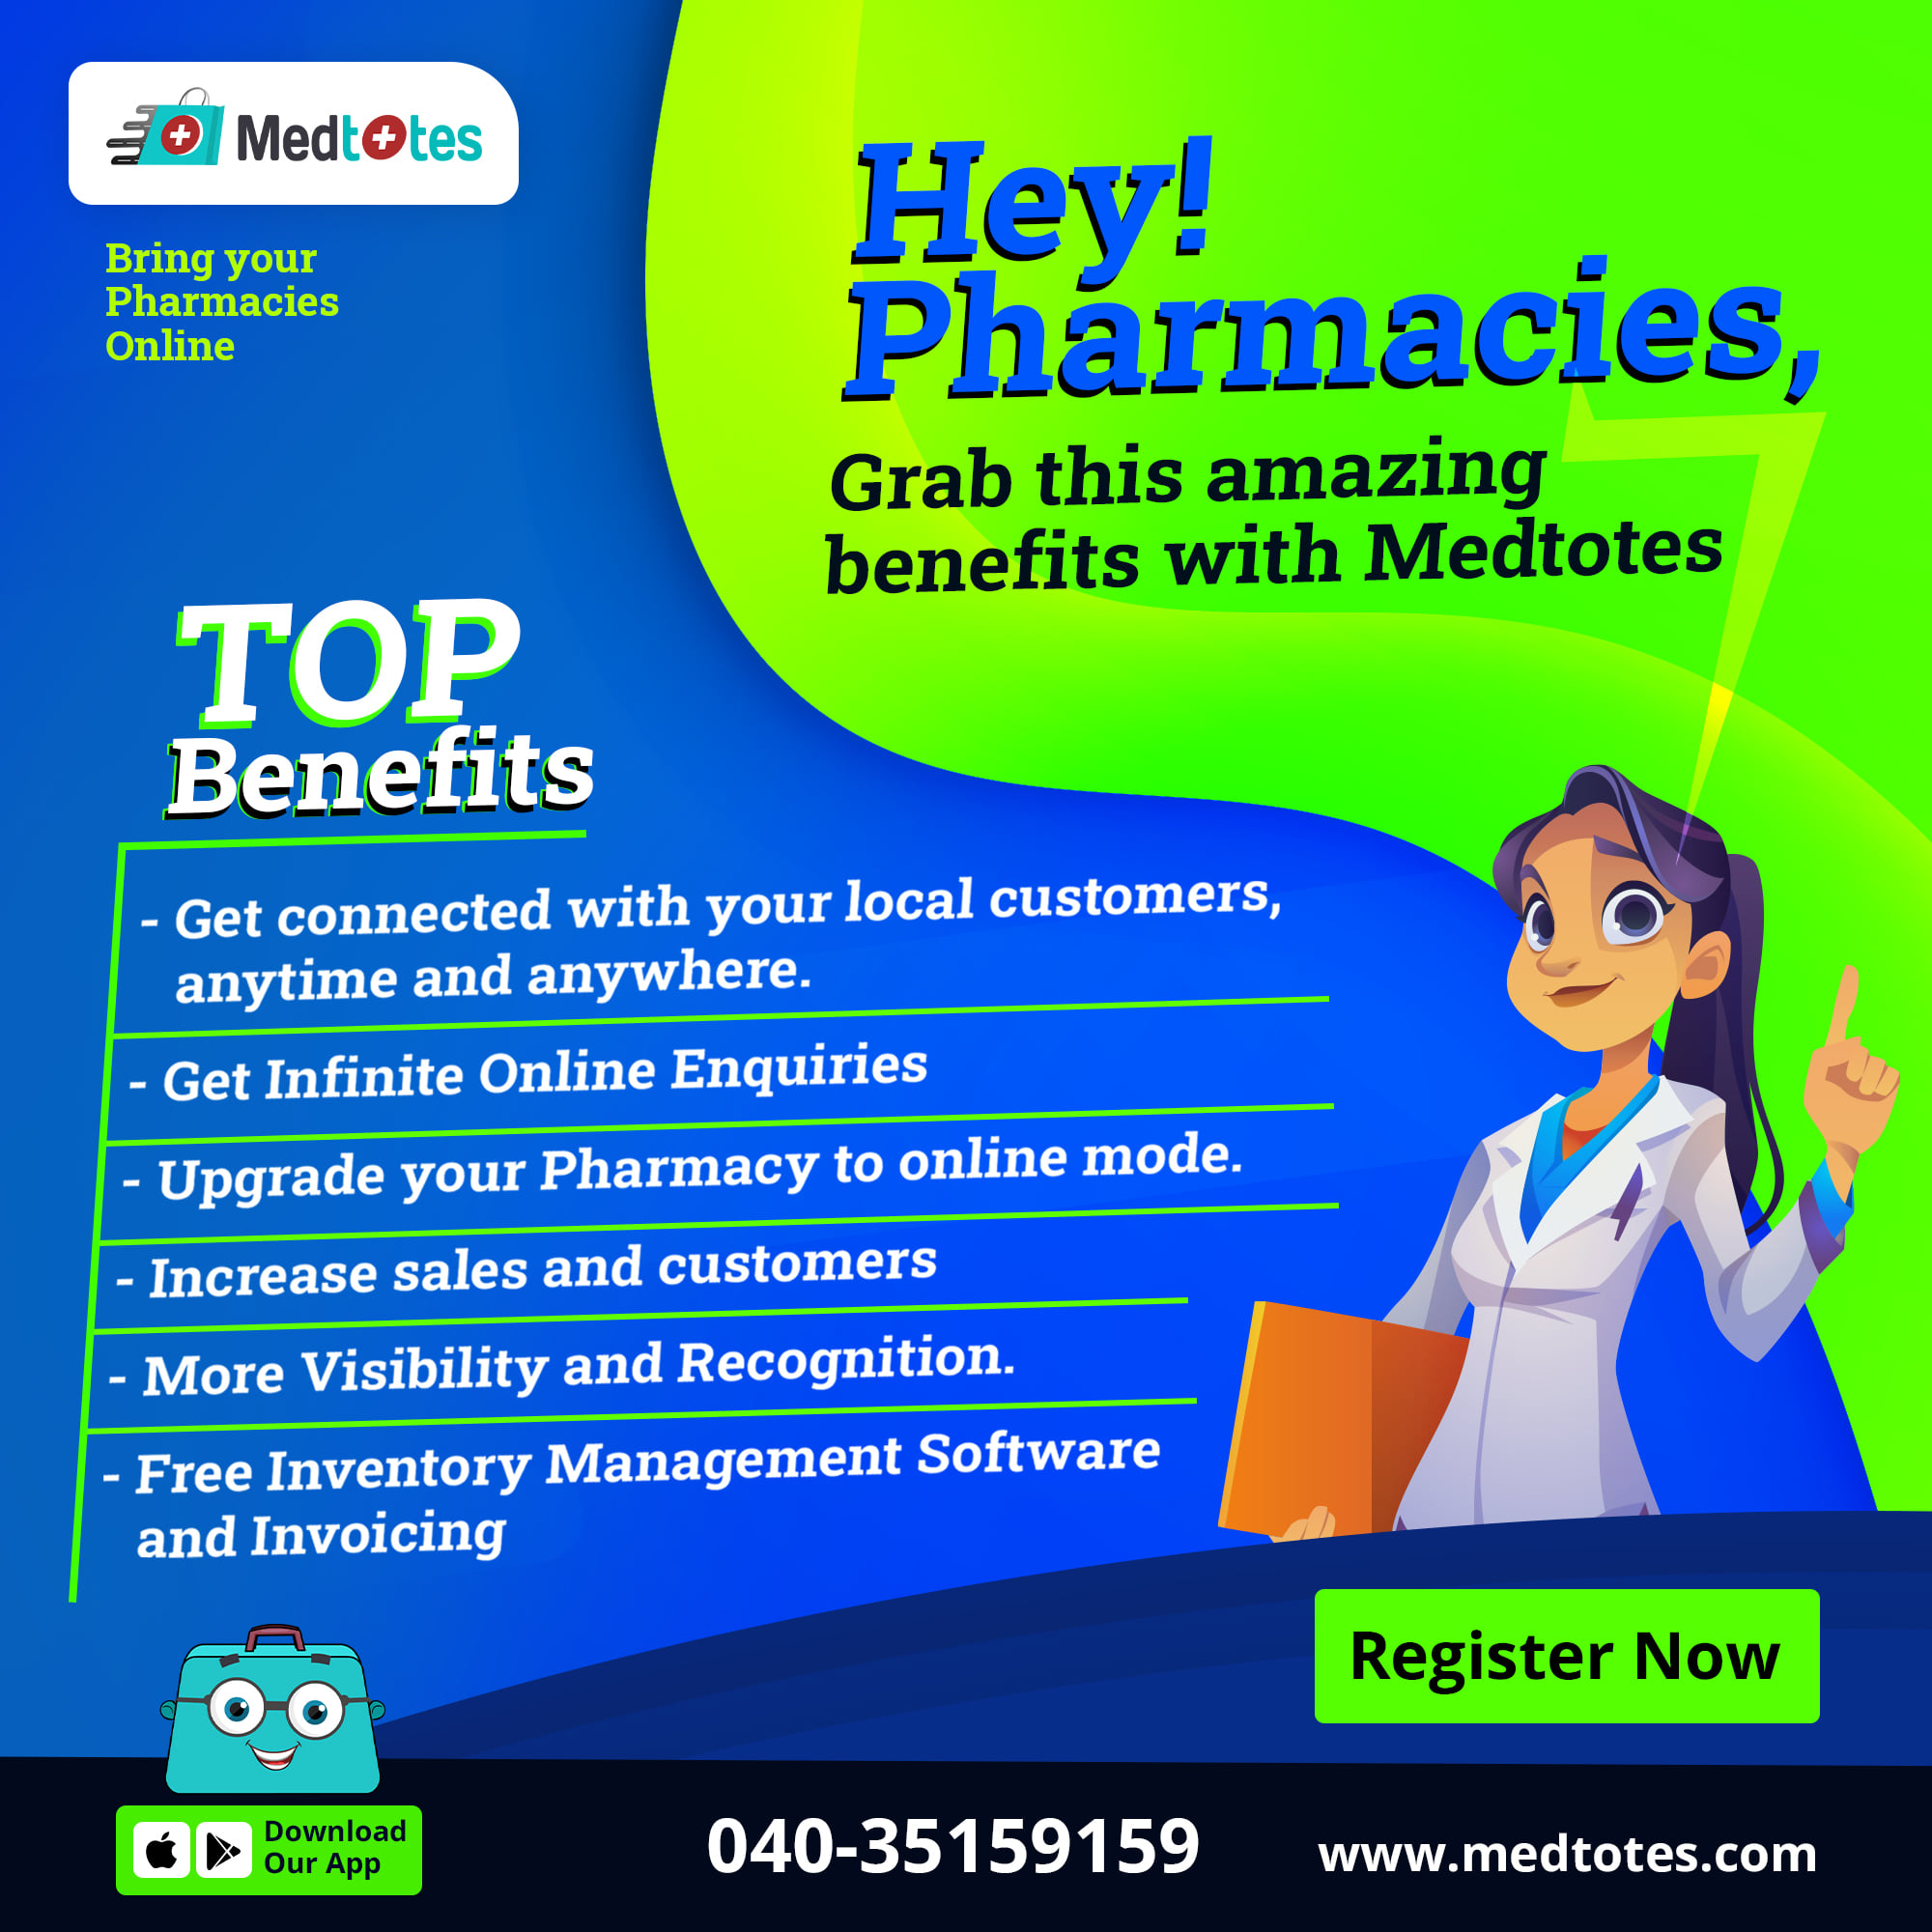 Hey! Pharmacies, Grab this amazing benefits with Medtotes.